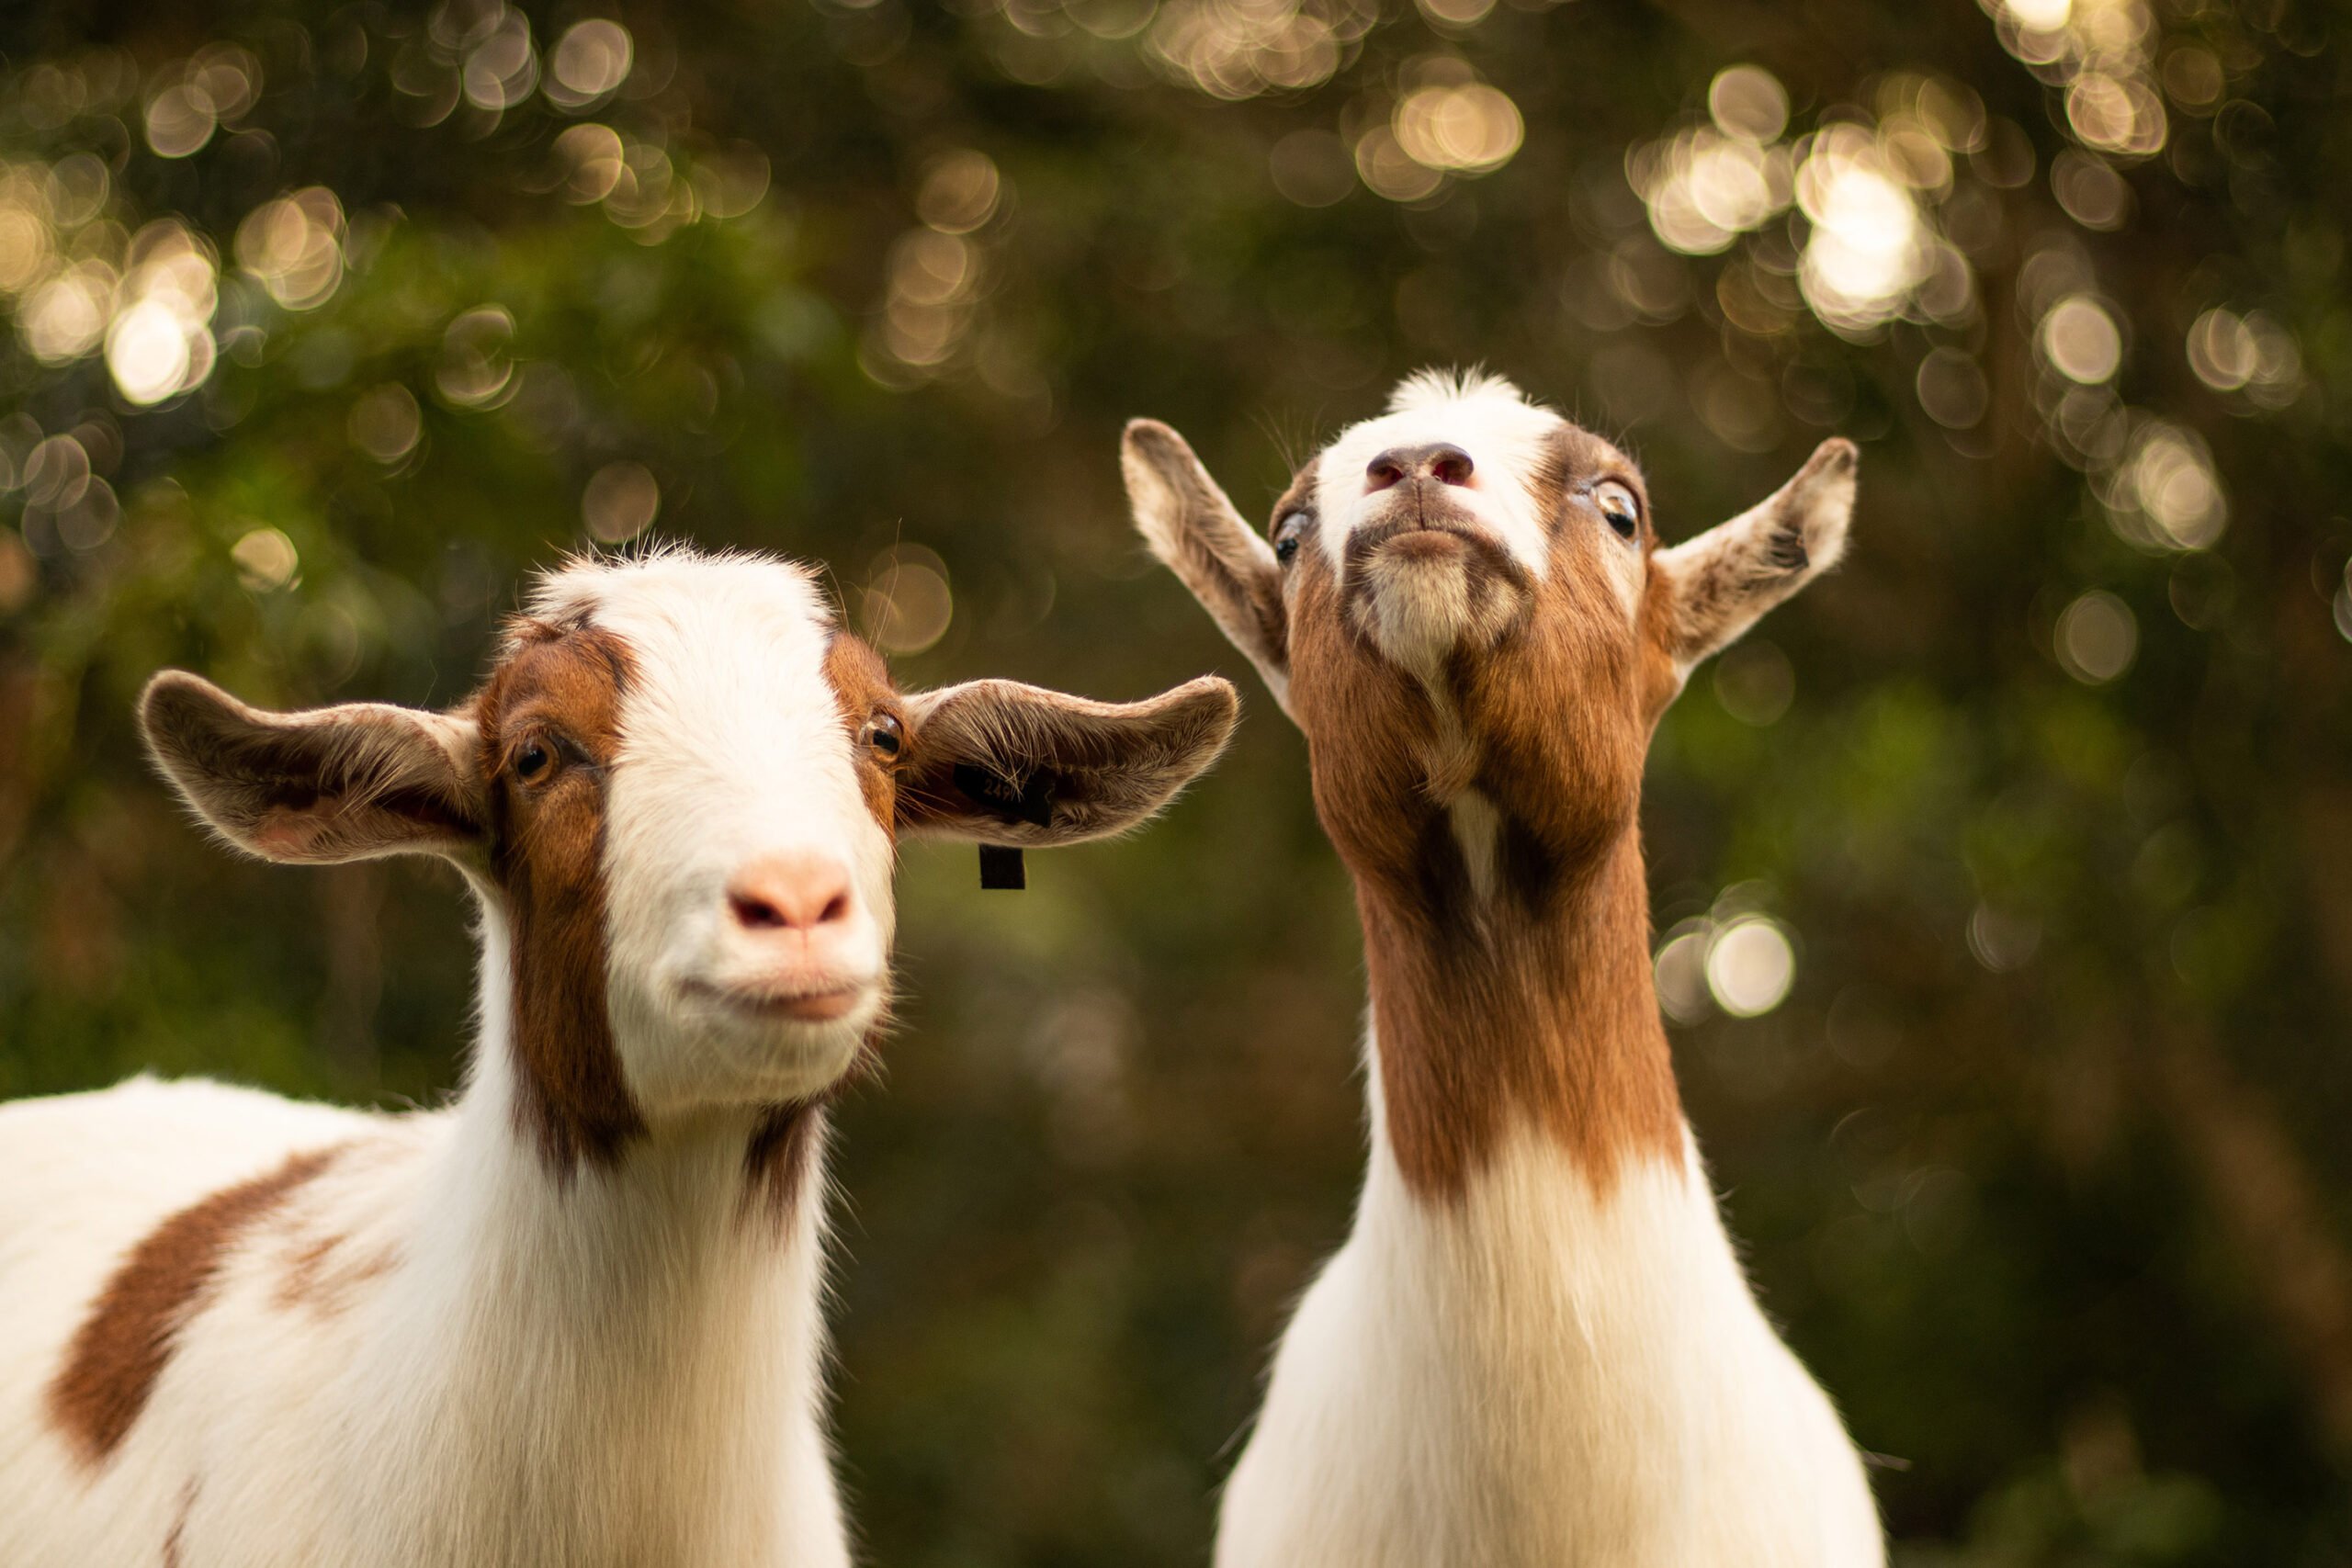 With eco-grazing goats and sheep replace your lawnmower